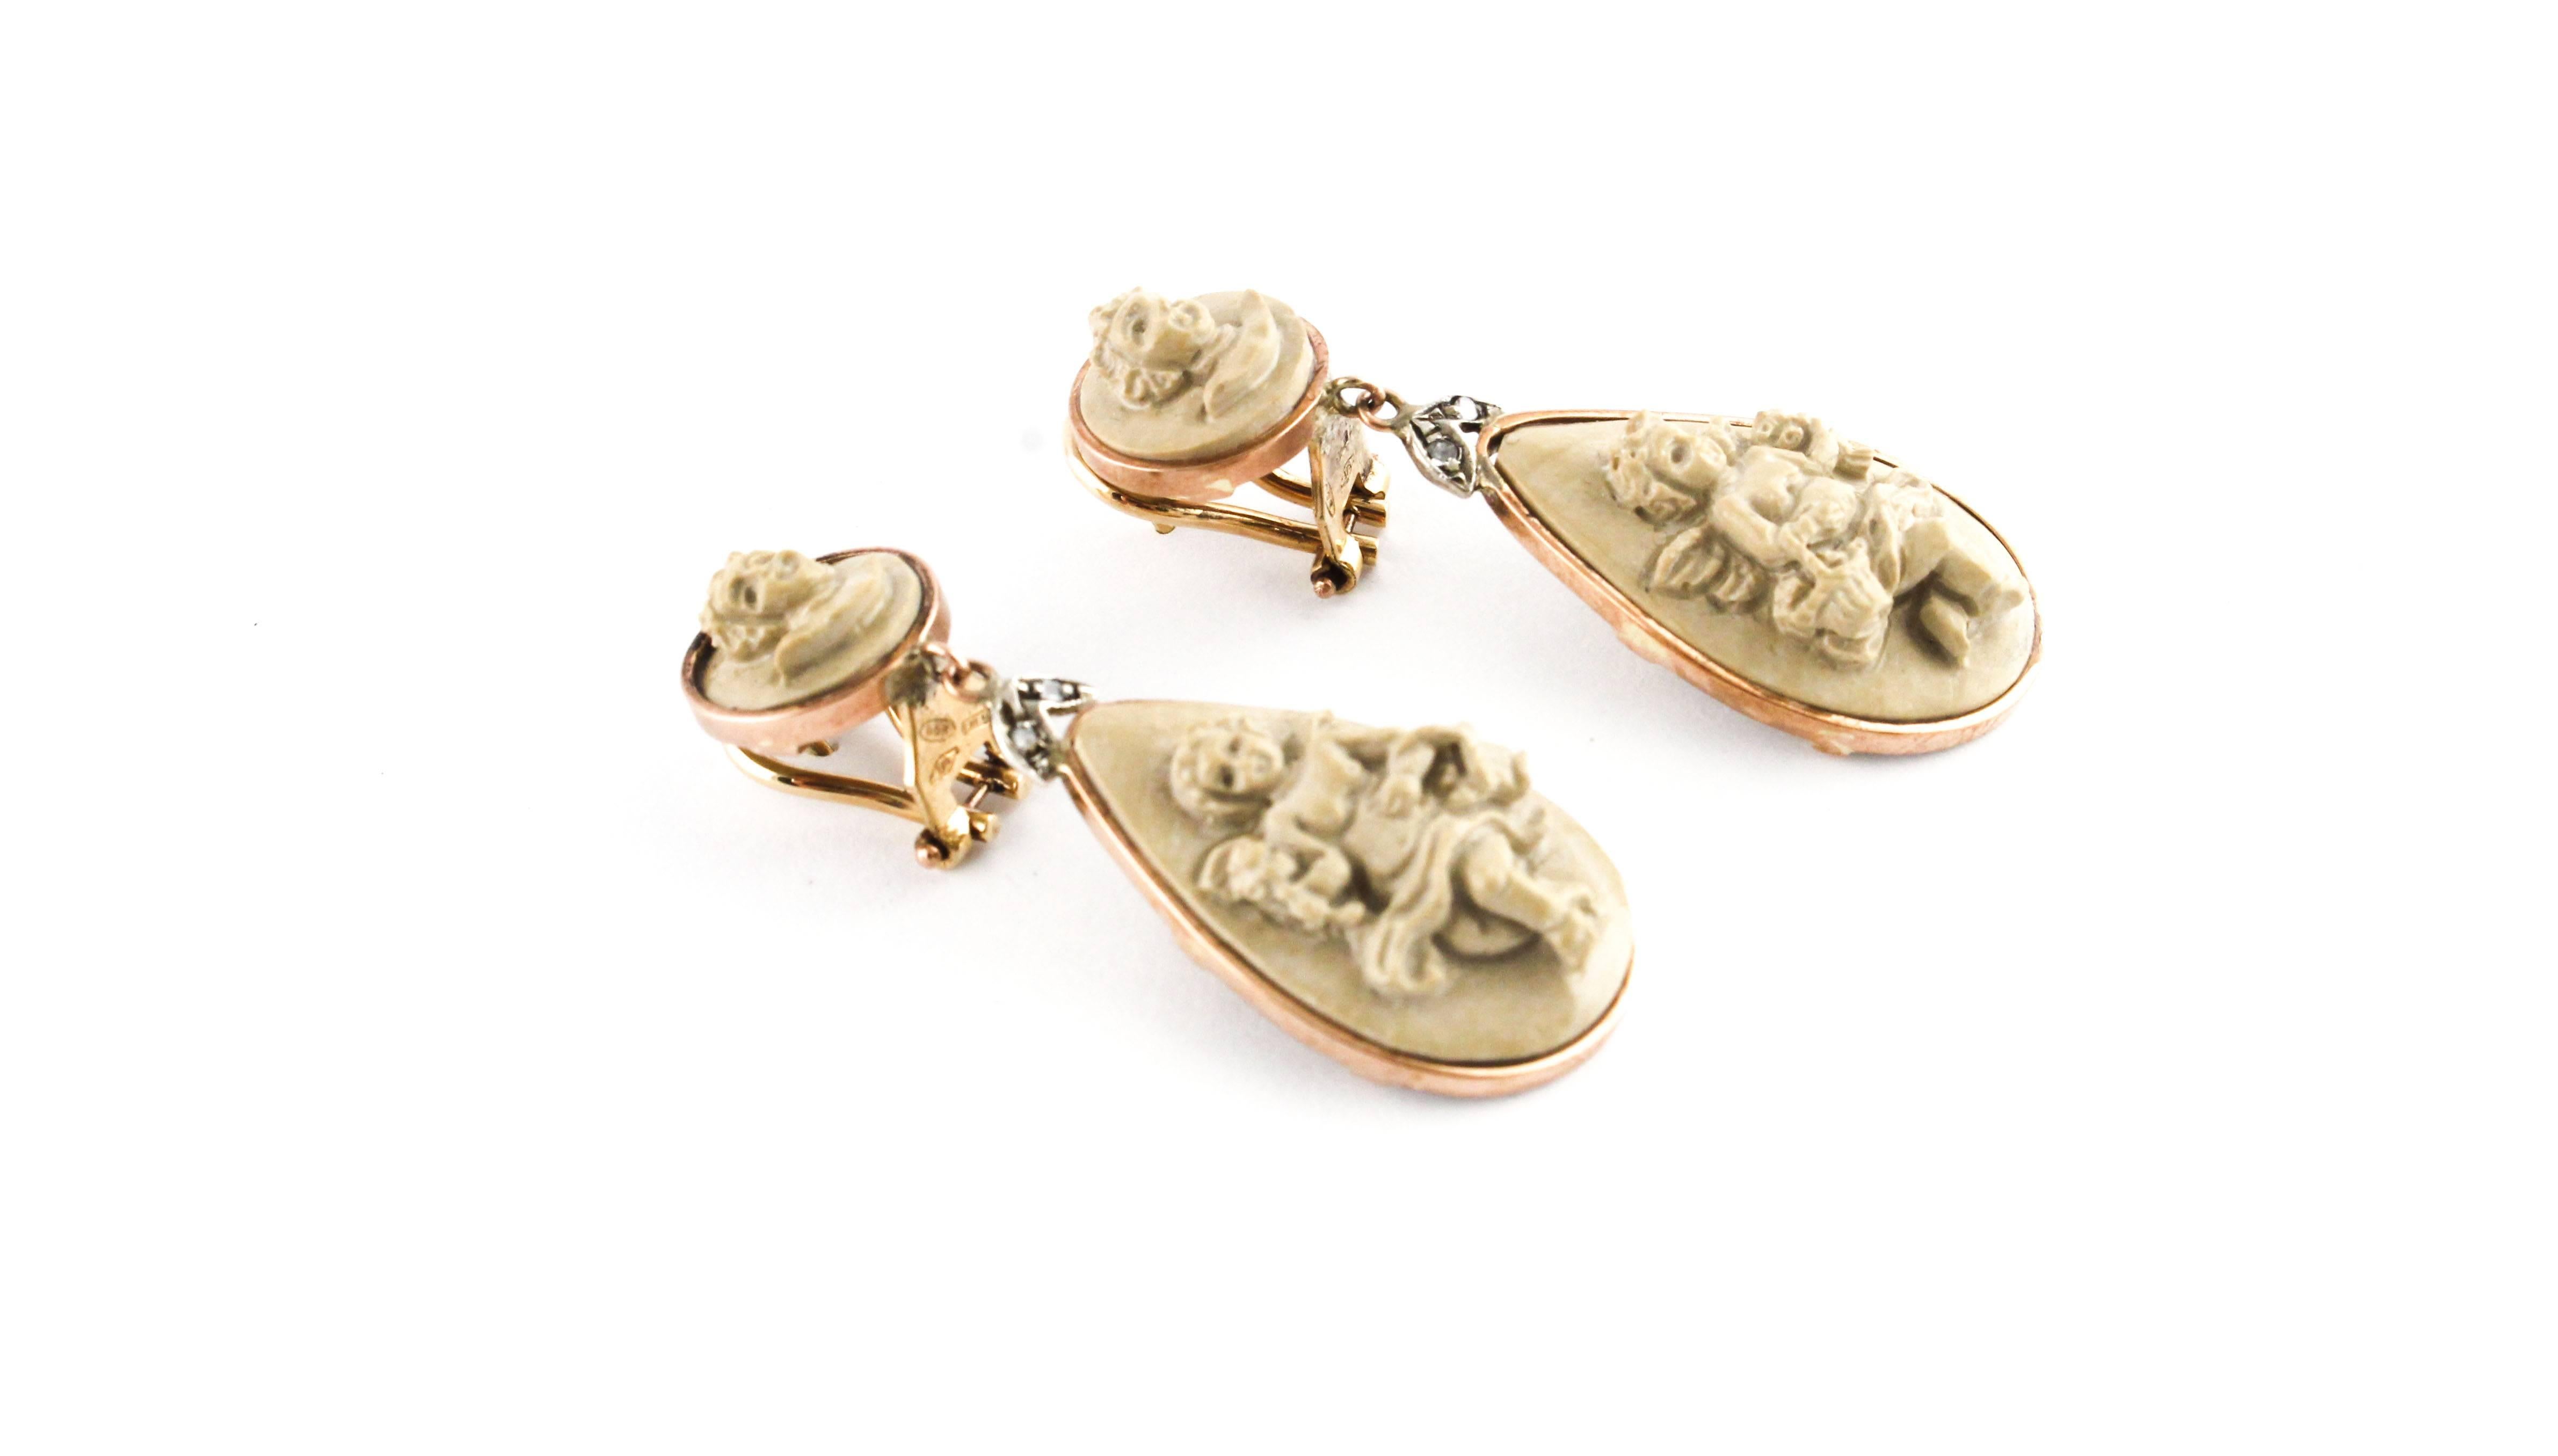 Beautiful earrings in 9 kt rose gold and silver of 11.50 g, embellished with angels and faces of cherubs entirely engraved on lava stone from 6 g and diamonds that illuminate this jewel.
Diamond 0.03 ct
Lava stone 6 g
total weight 11,50 g 
R.F